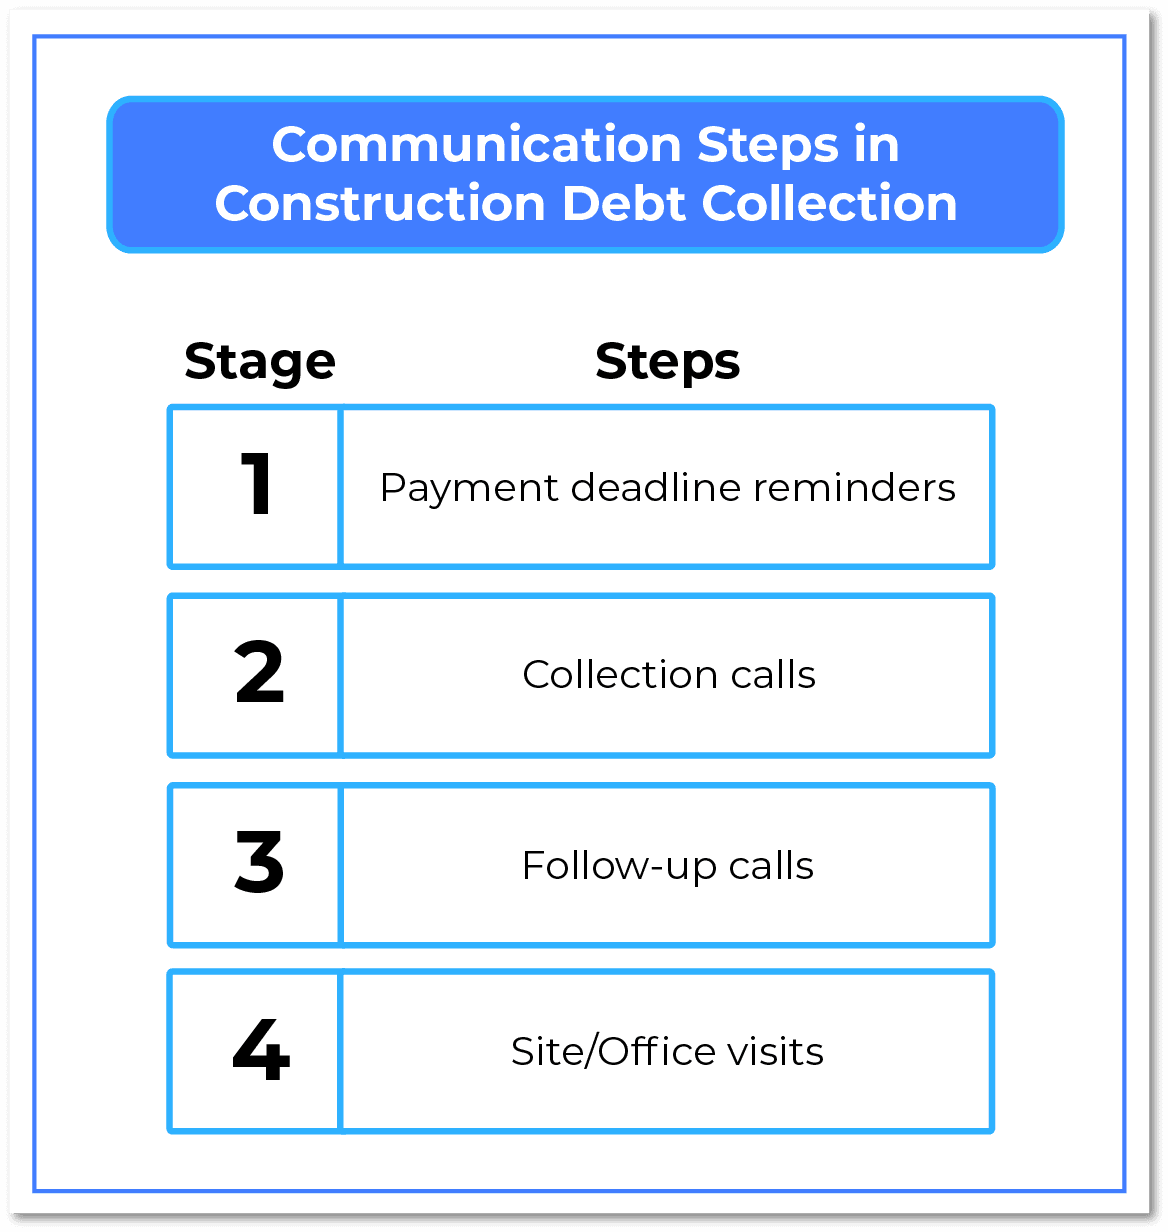 Communication Steps in Construction Debt Collection